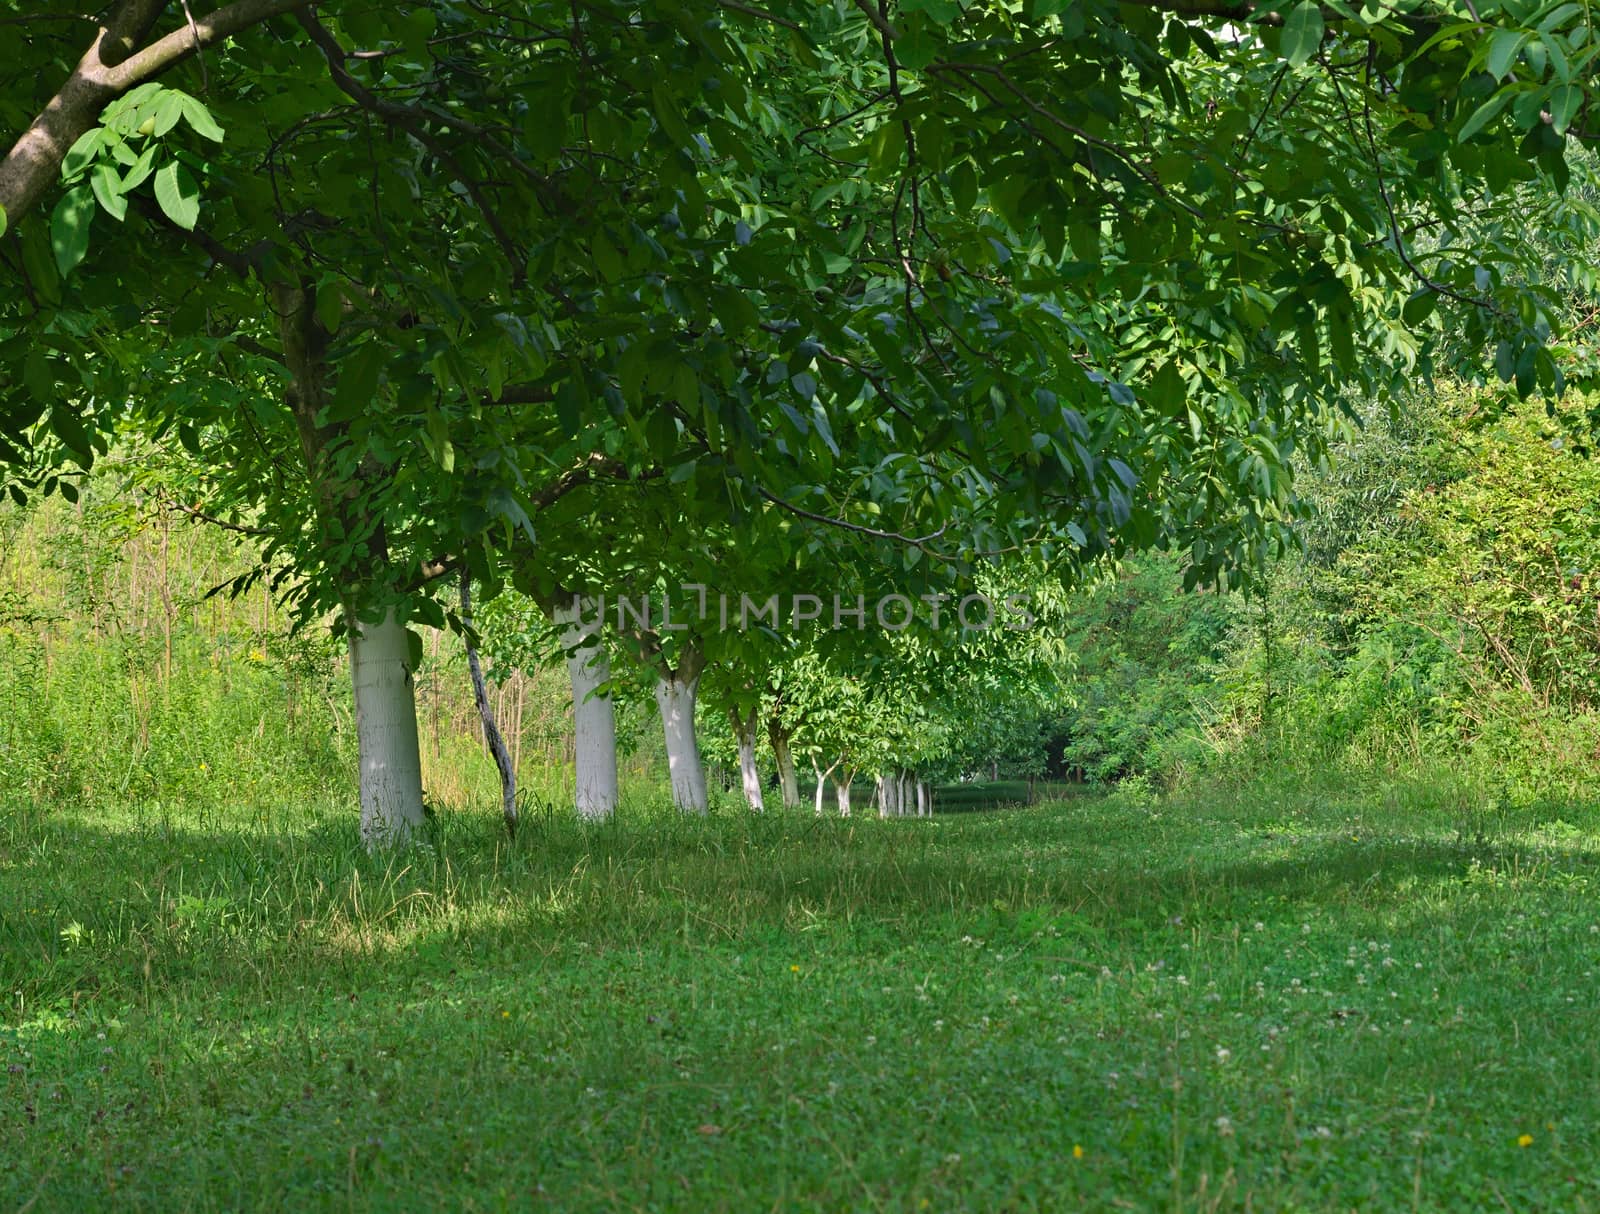 Row of walnut trees trunks painted in white and leaves